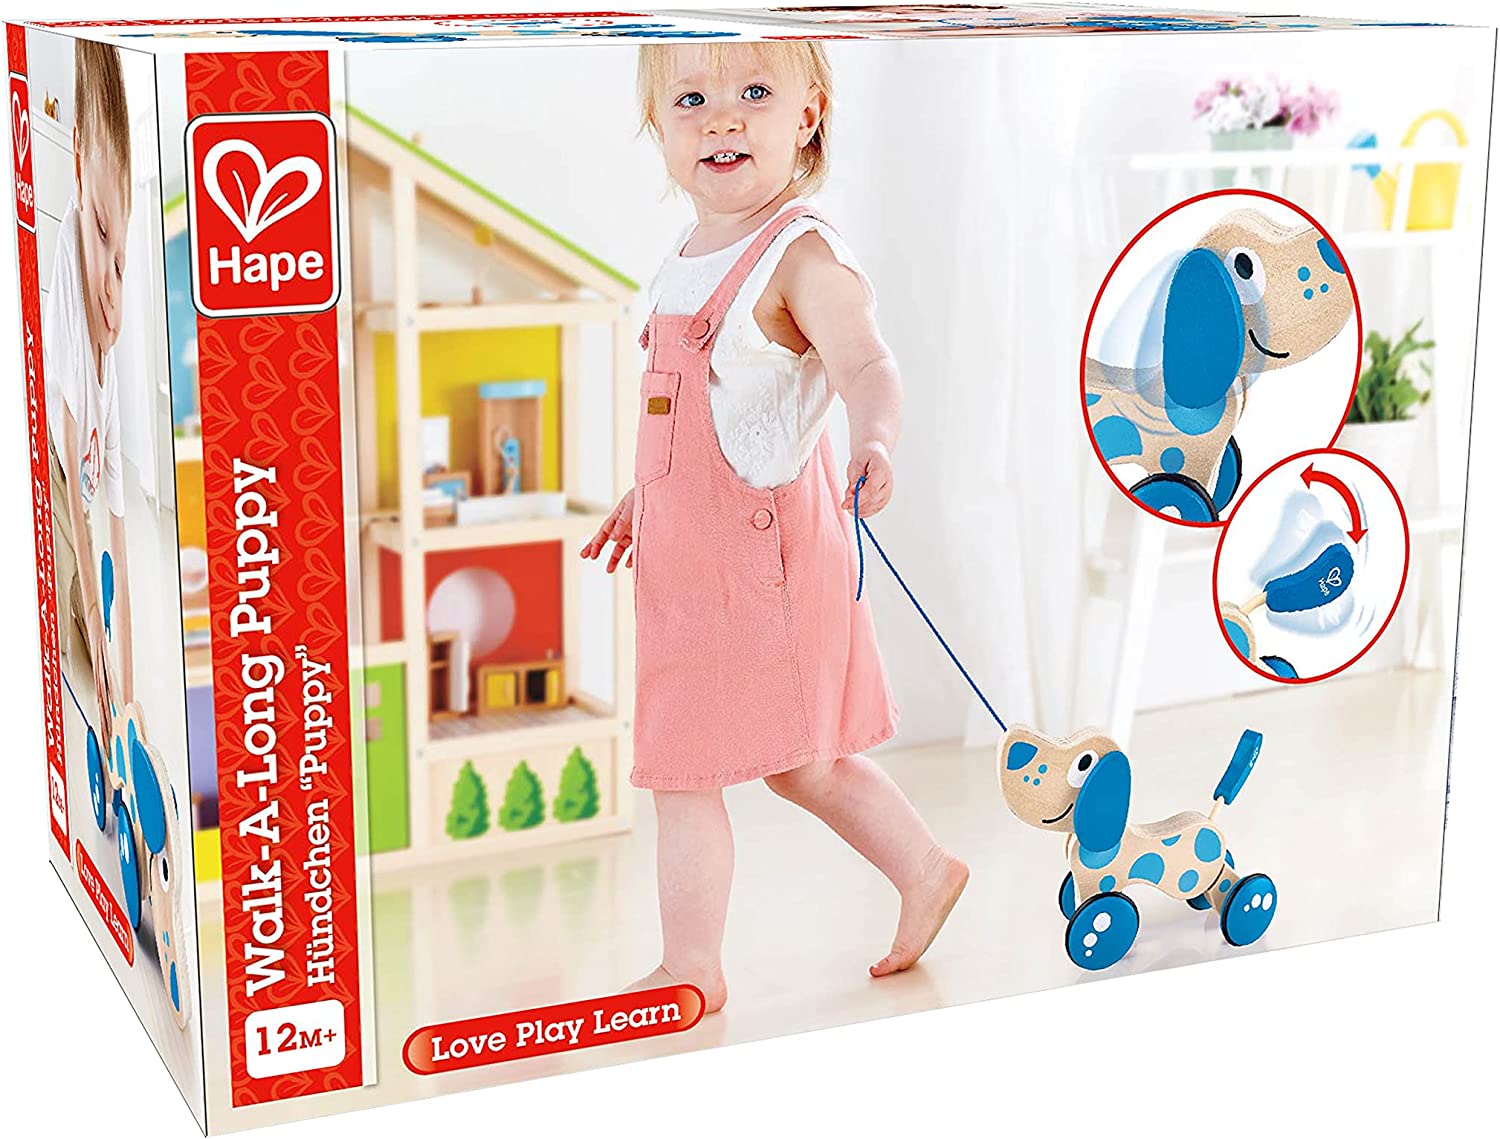 Hape Walk-A-Long Puppy Wooden Pull Toy | Push Pull Toy Puppy For Toddlers Can Sit, Stand and Roll. Rubber Rimmed Wheels for Easy Push and Pull Action, Blue